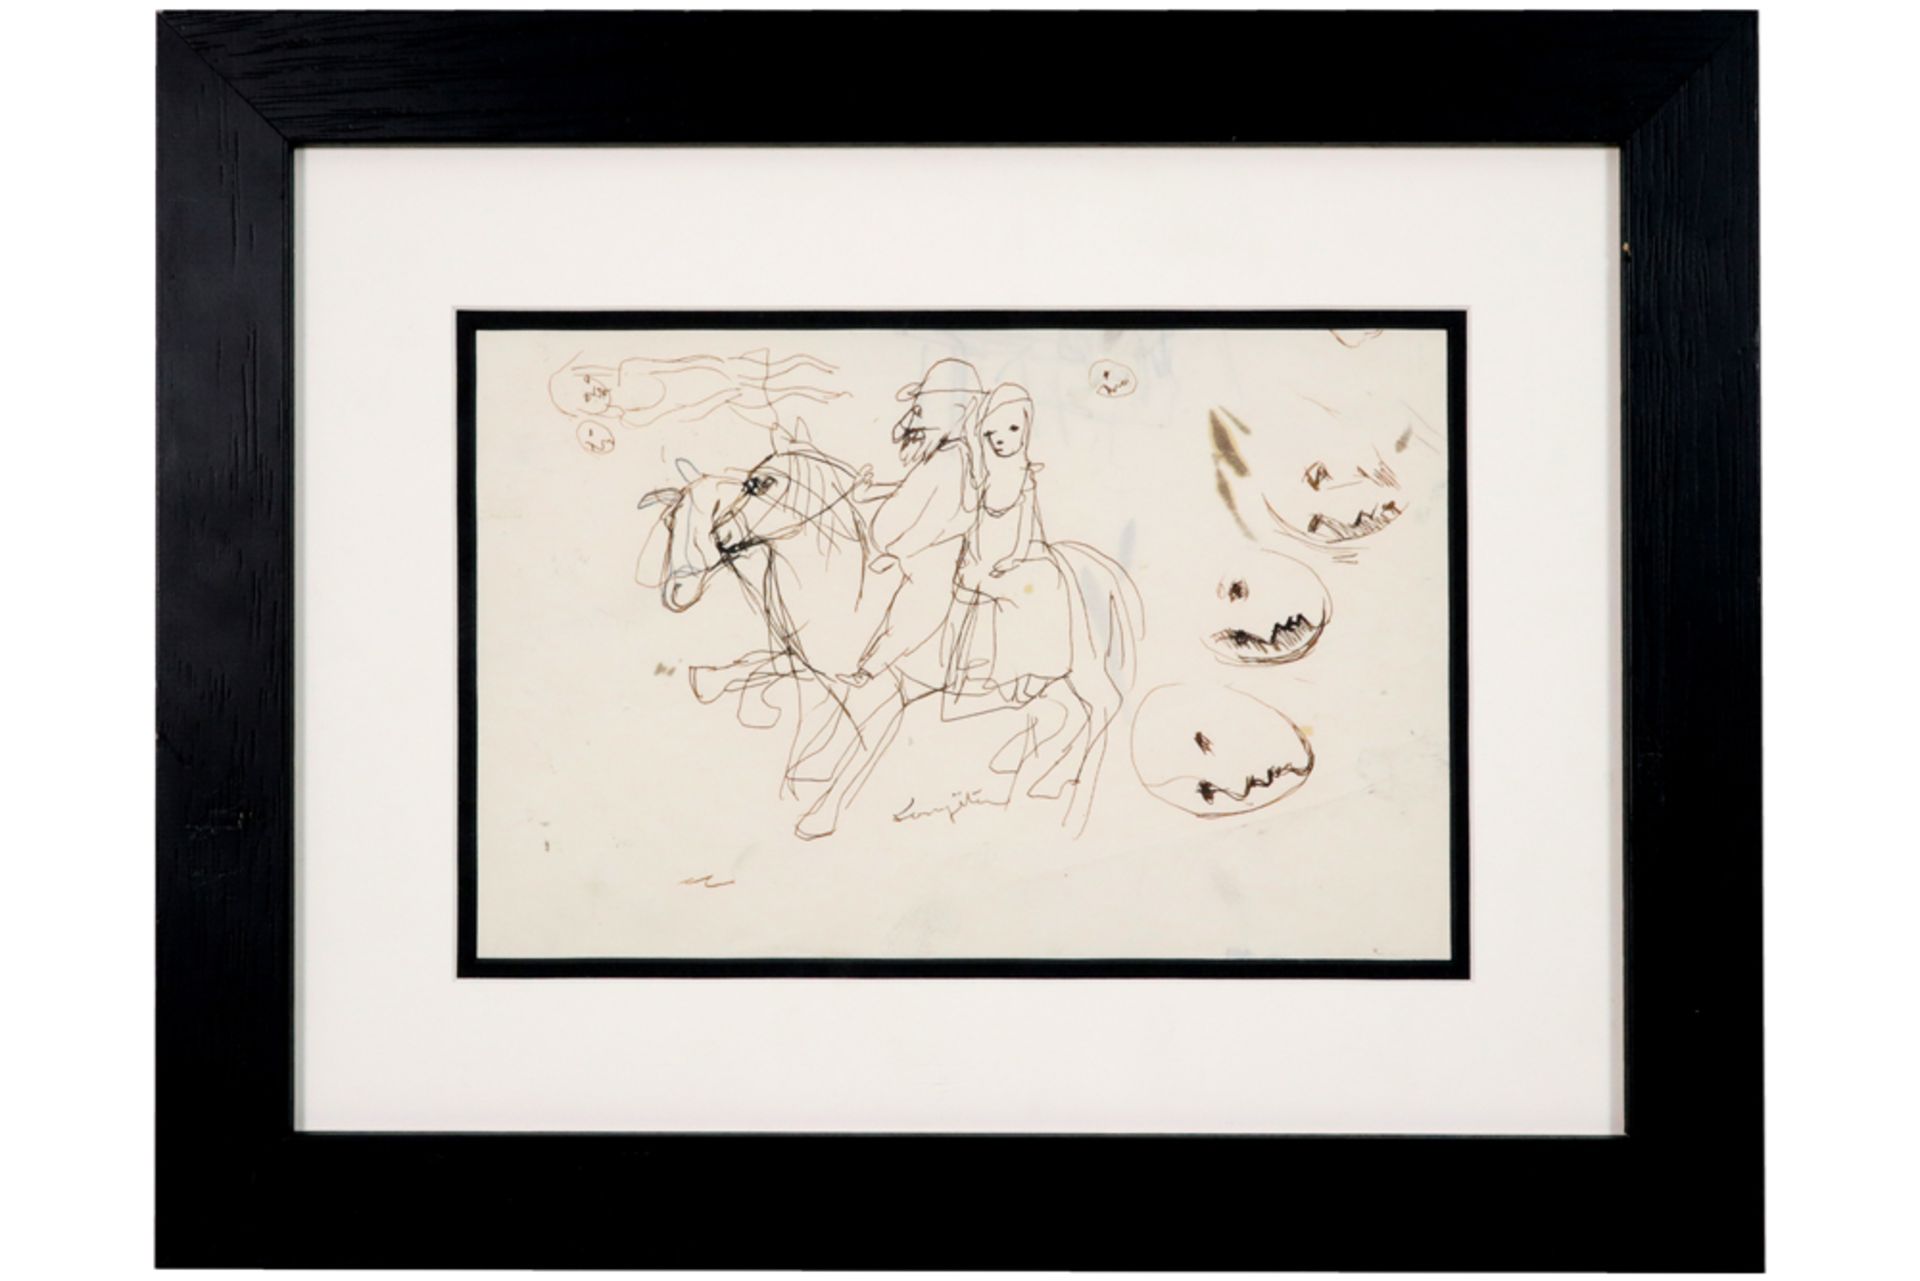 Leonard Tsuguharu Foujita ink drawing with sketches of a figure on a horse and some faces prov : - Image 3 of 3